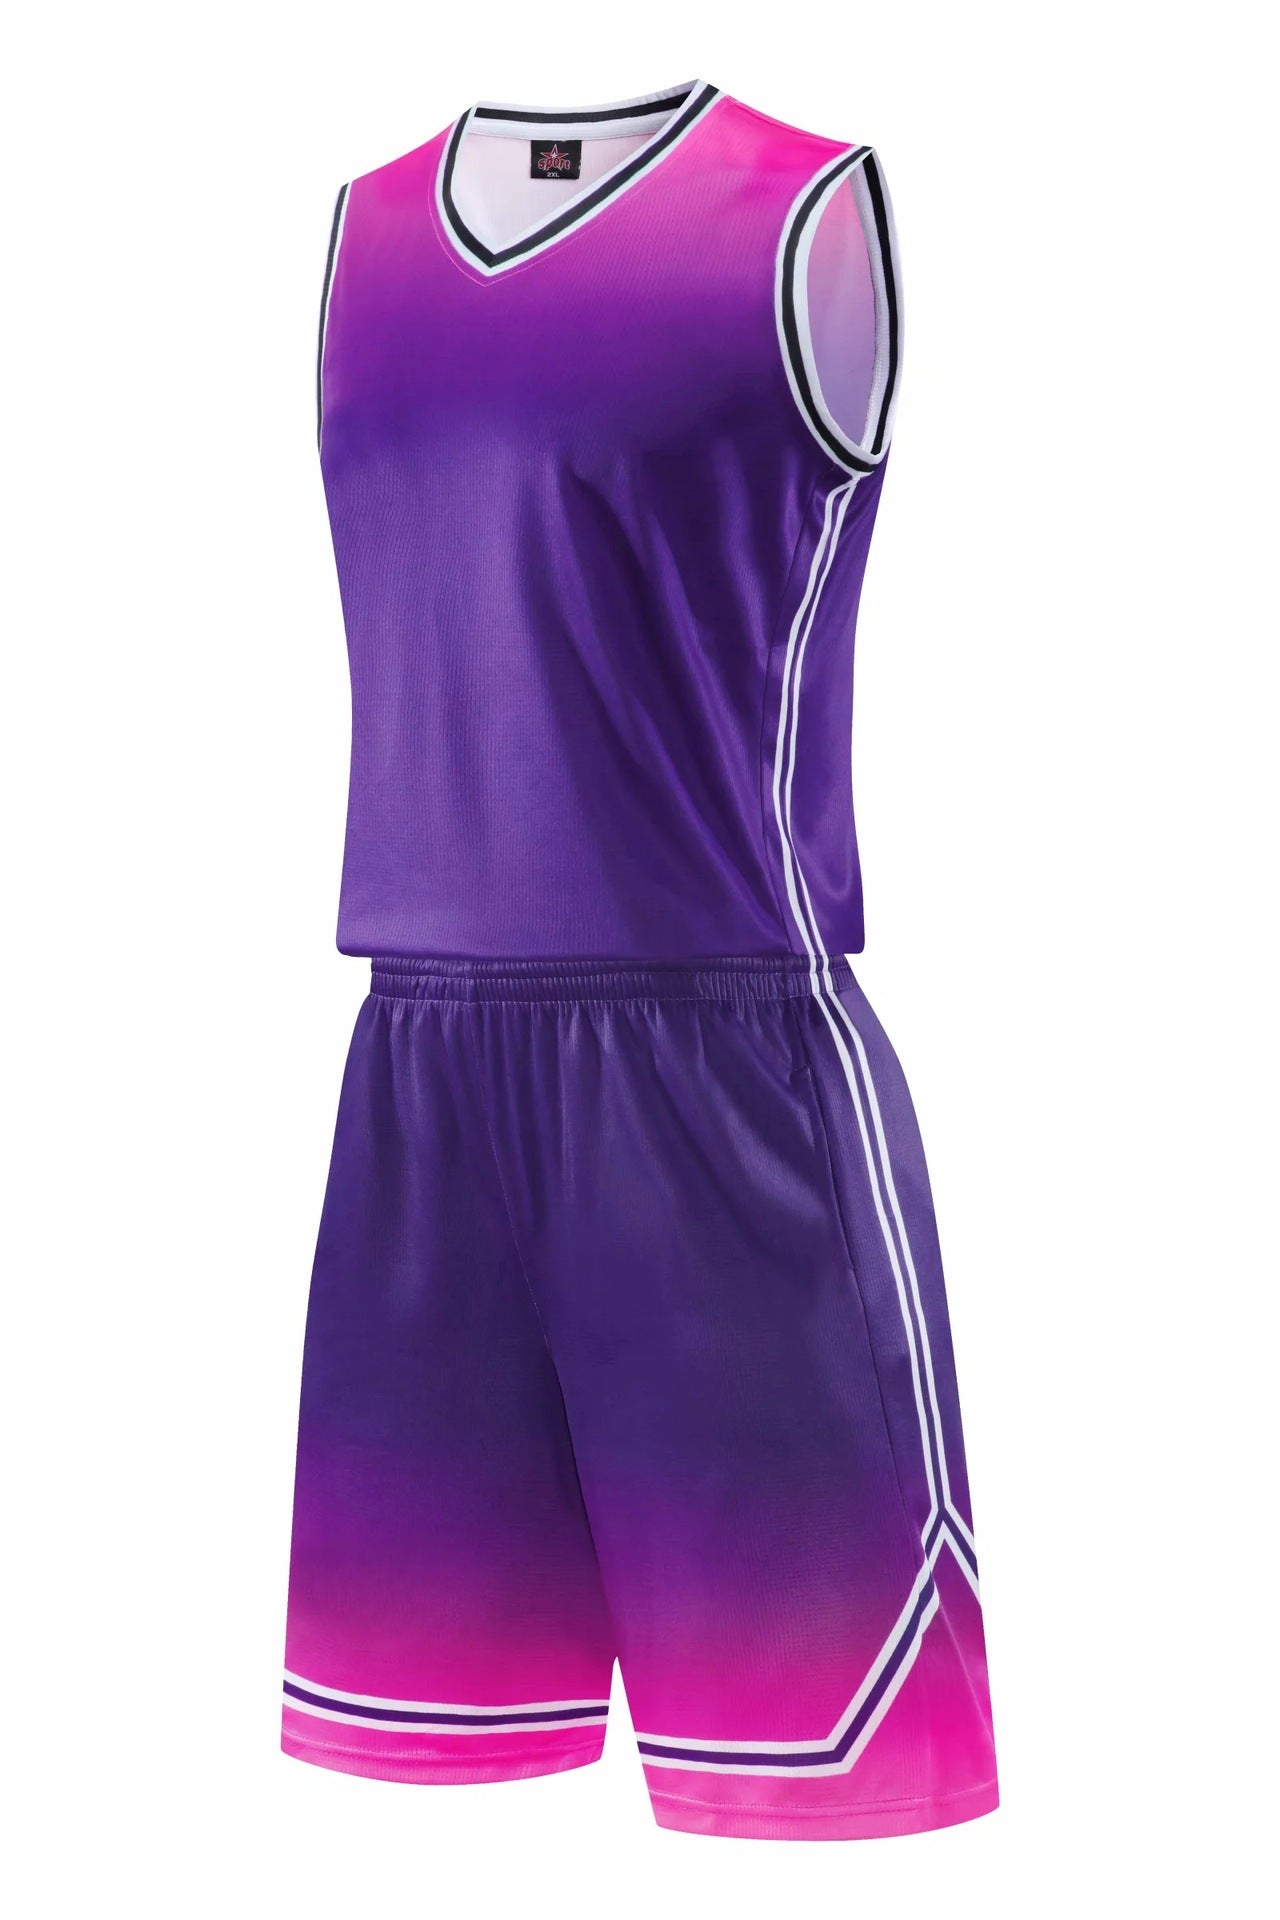 Gradient Basketball Sweat-Absorbent Sports Outfit Boys